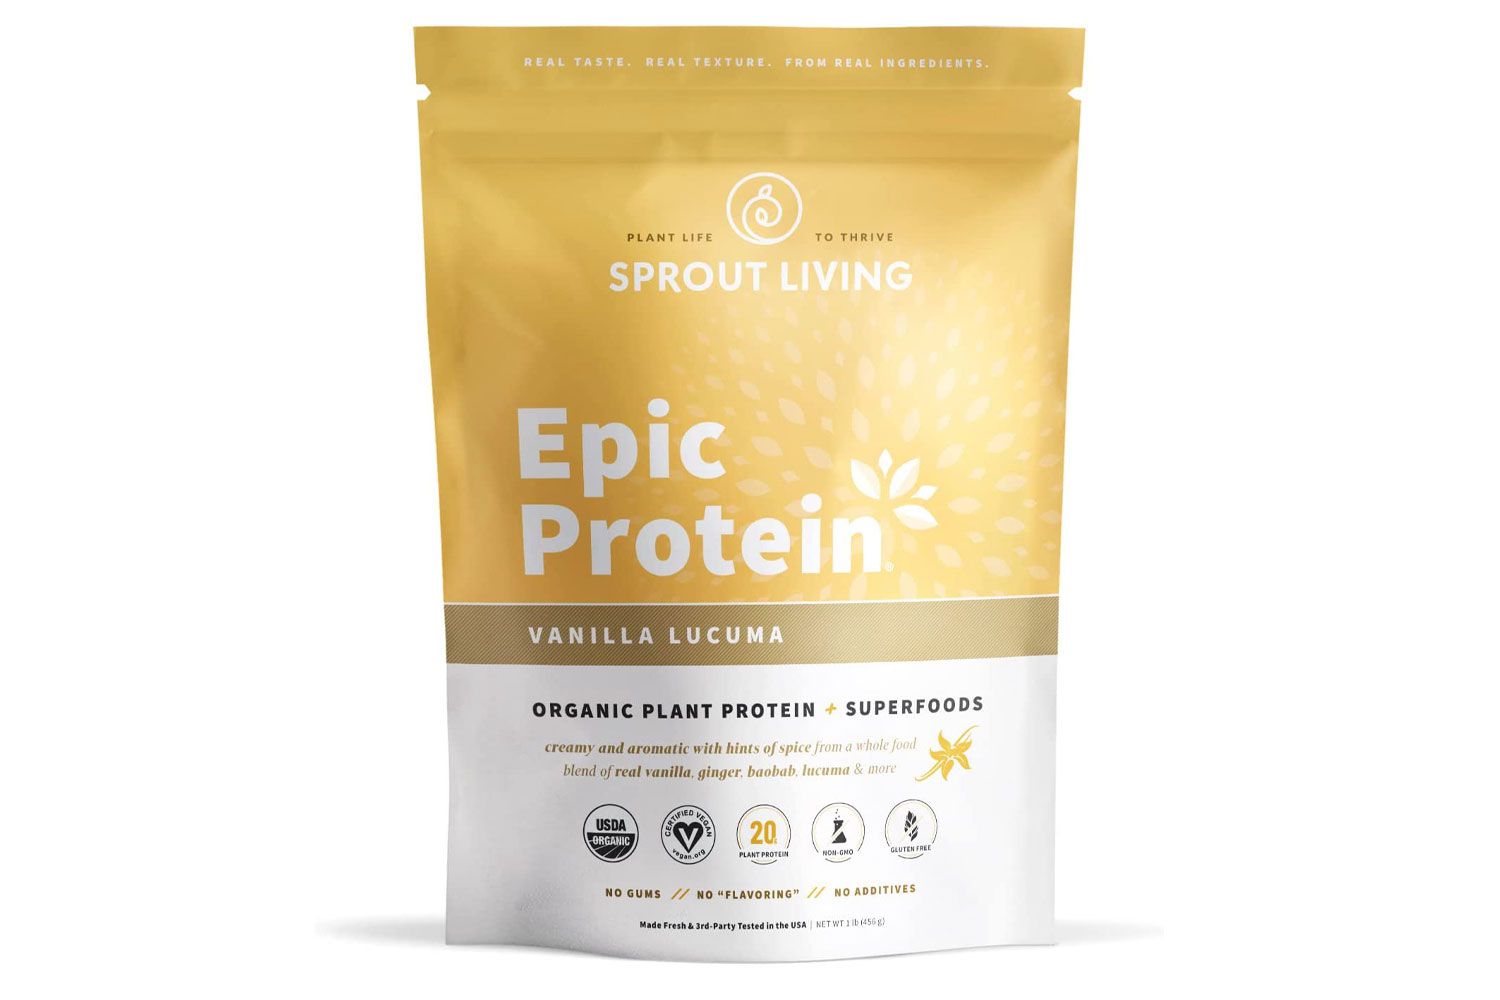 Sprout Living Epic Protein Vanille Lucuma